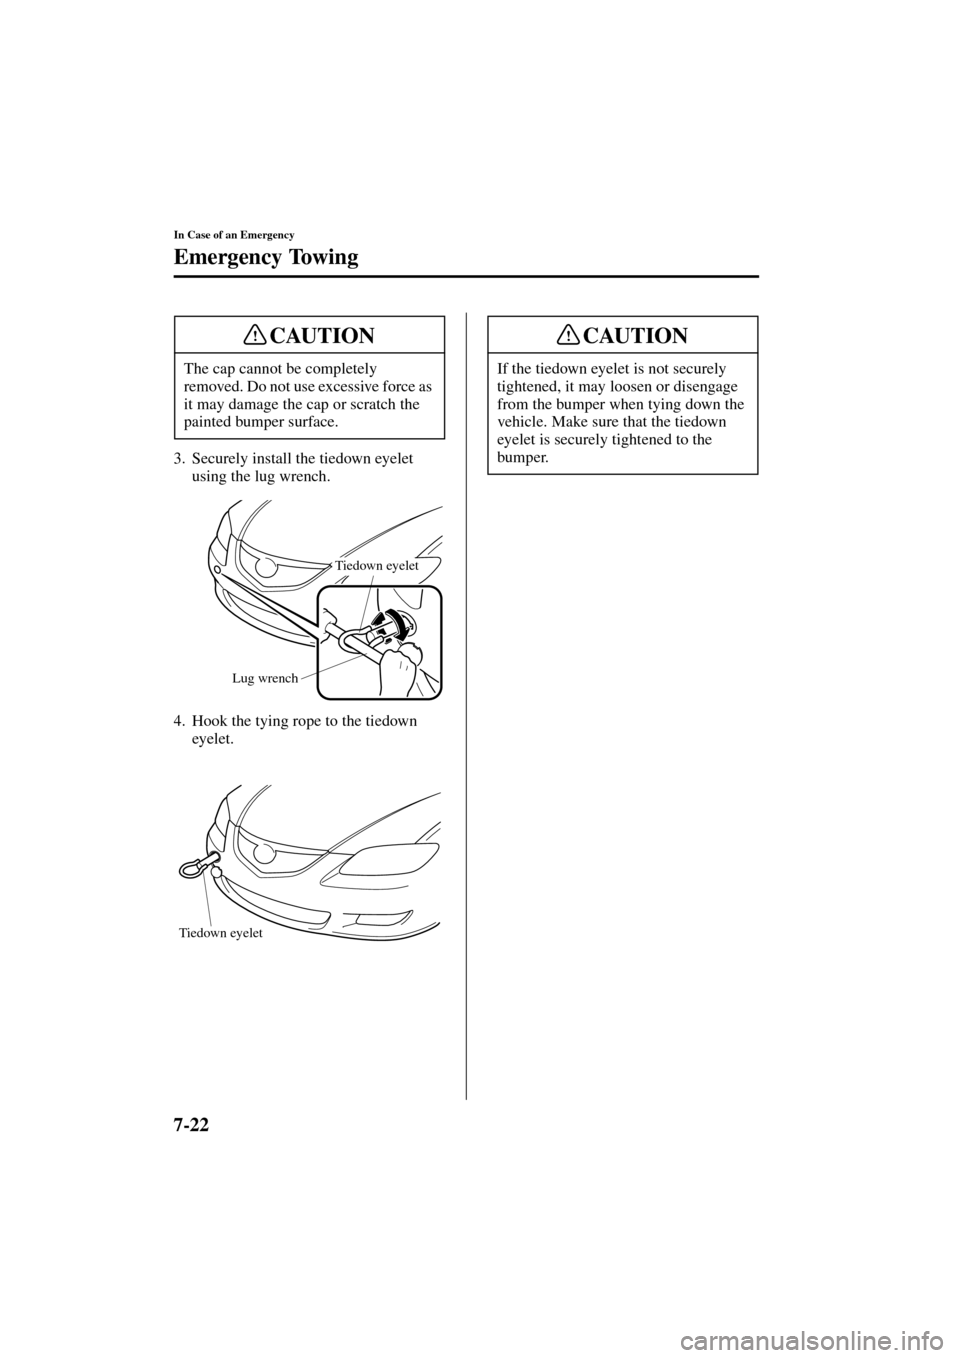 MAZDA MODEL 3 HATCHBACK 2004  Owners Manual (in English) 7-22
In Case of an Emergency
Emergency Towing
Form No. 8S18-EA-03I
3. Securely install the tiedown eyelet 
using the lug wrench.
4. Hook the tying rope to the tiedown 
eyelet. The cap cannot be comple